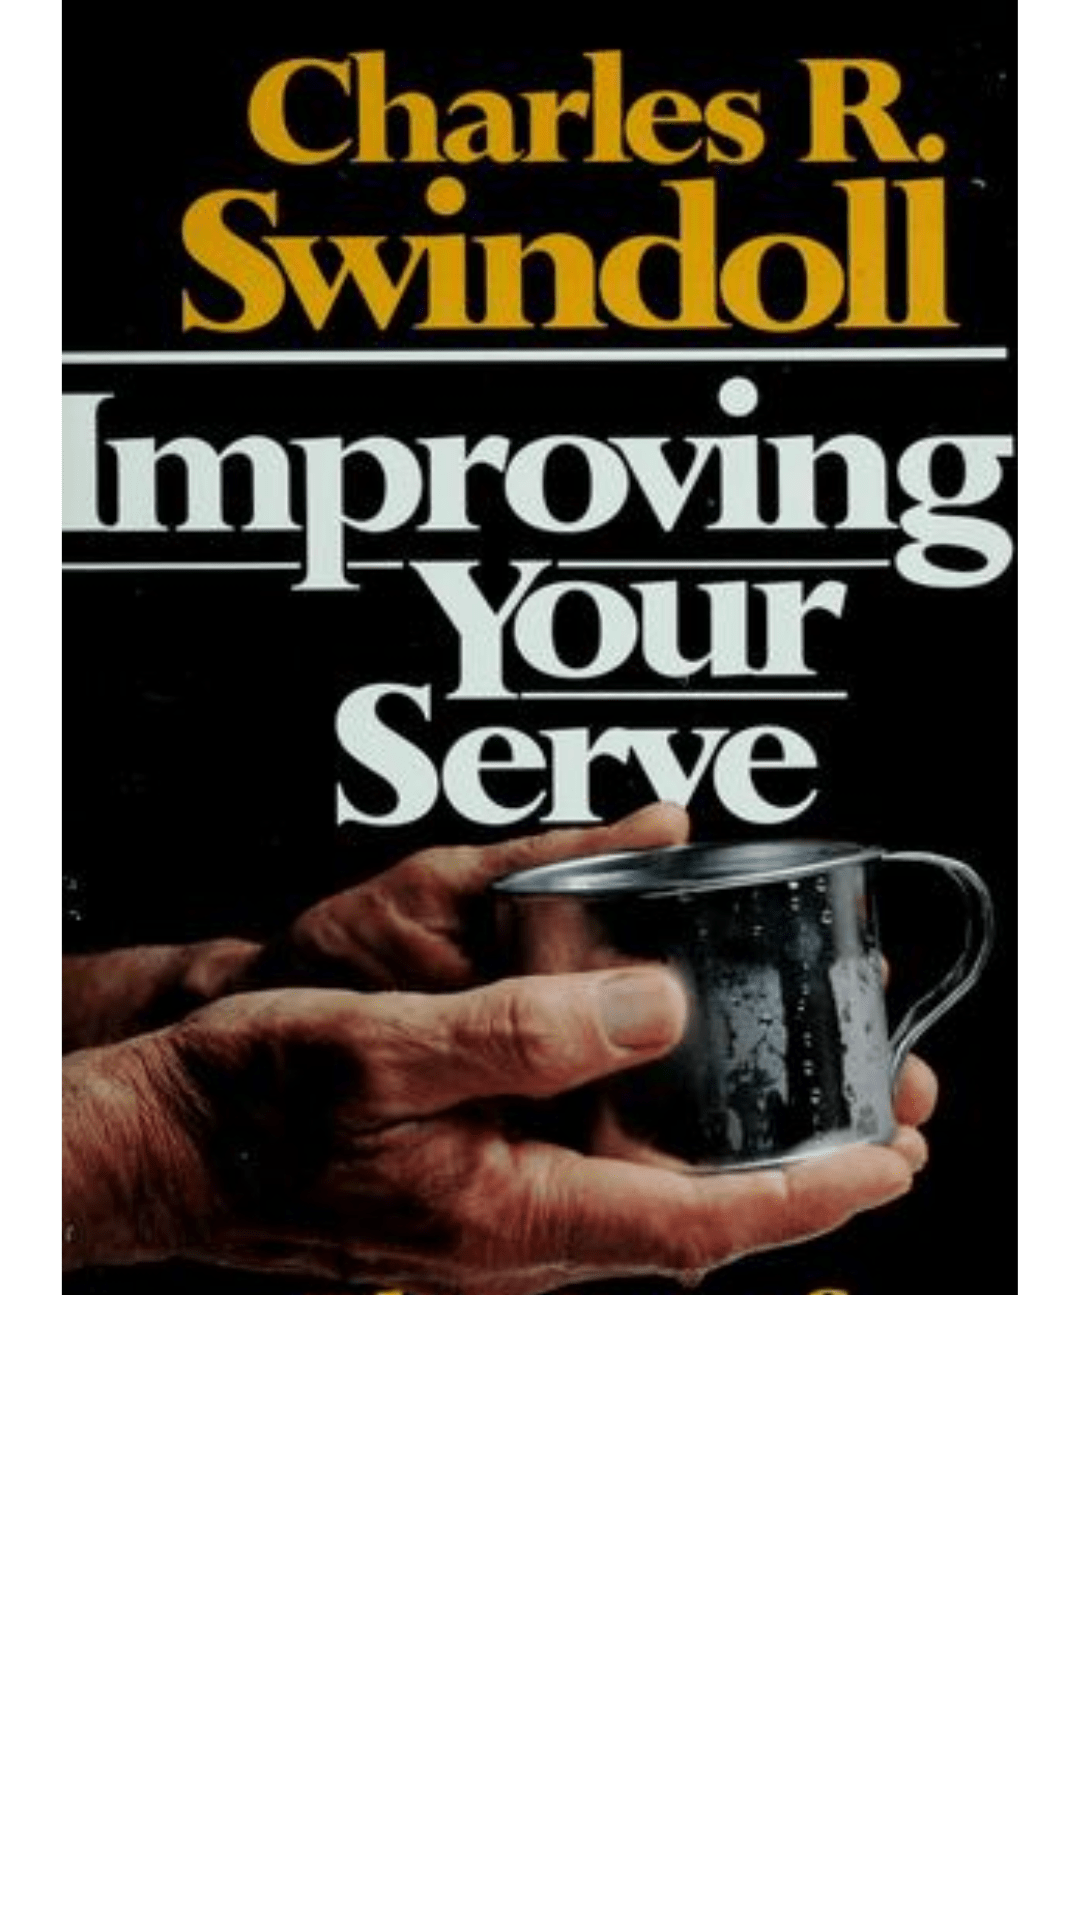 Improving Your Serve by Charles R. Swindoll